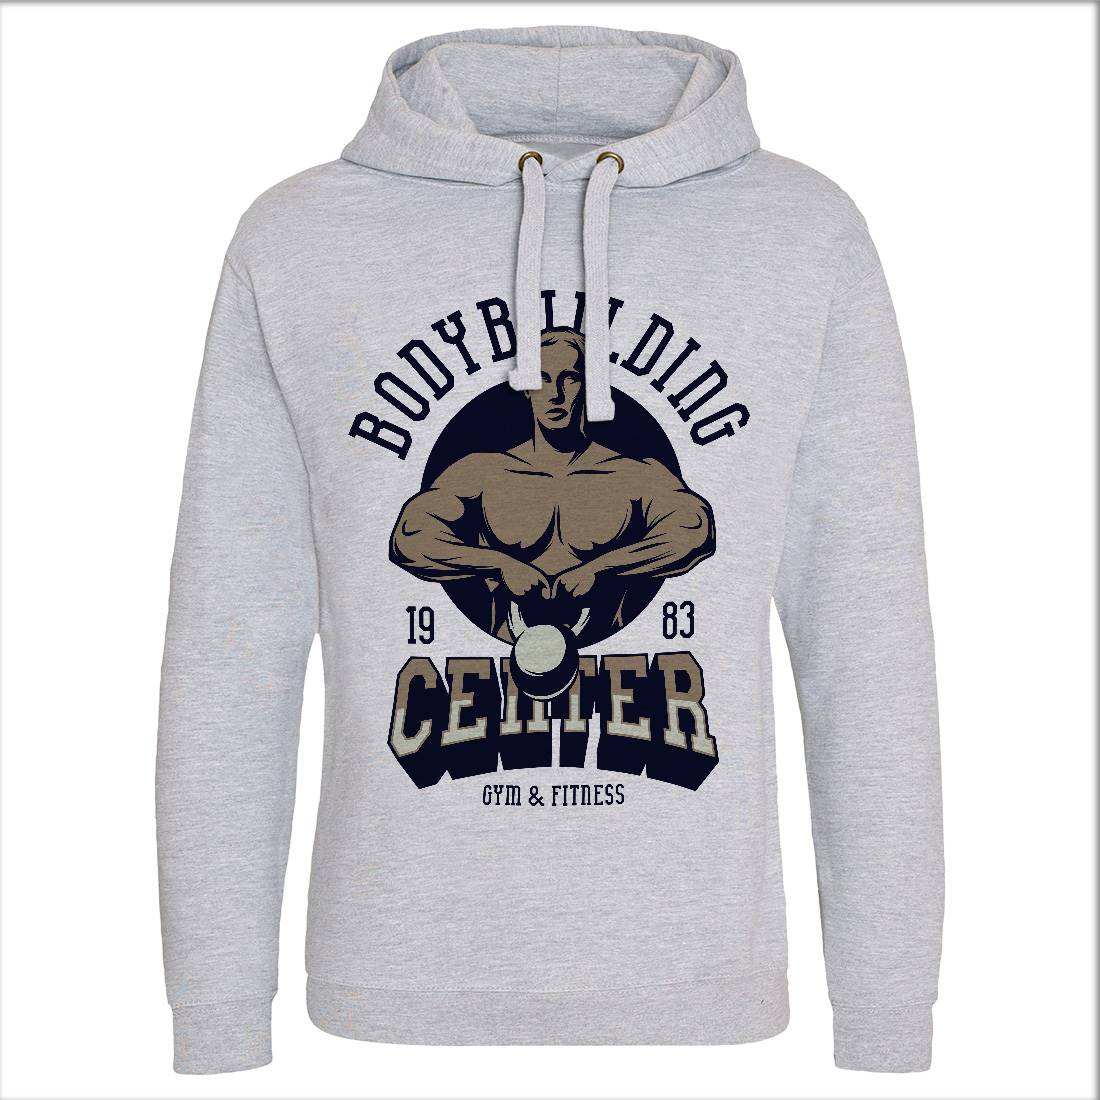 Bodybuilding Centre Mens Hoodie Without Pocket Gym D911